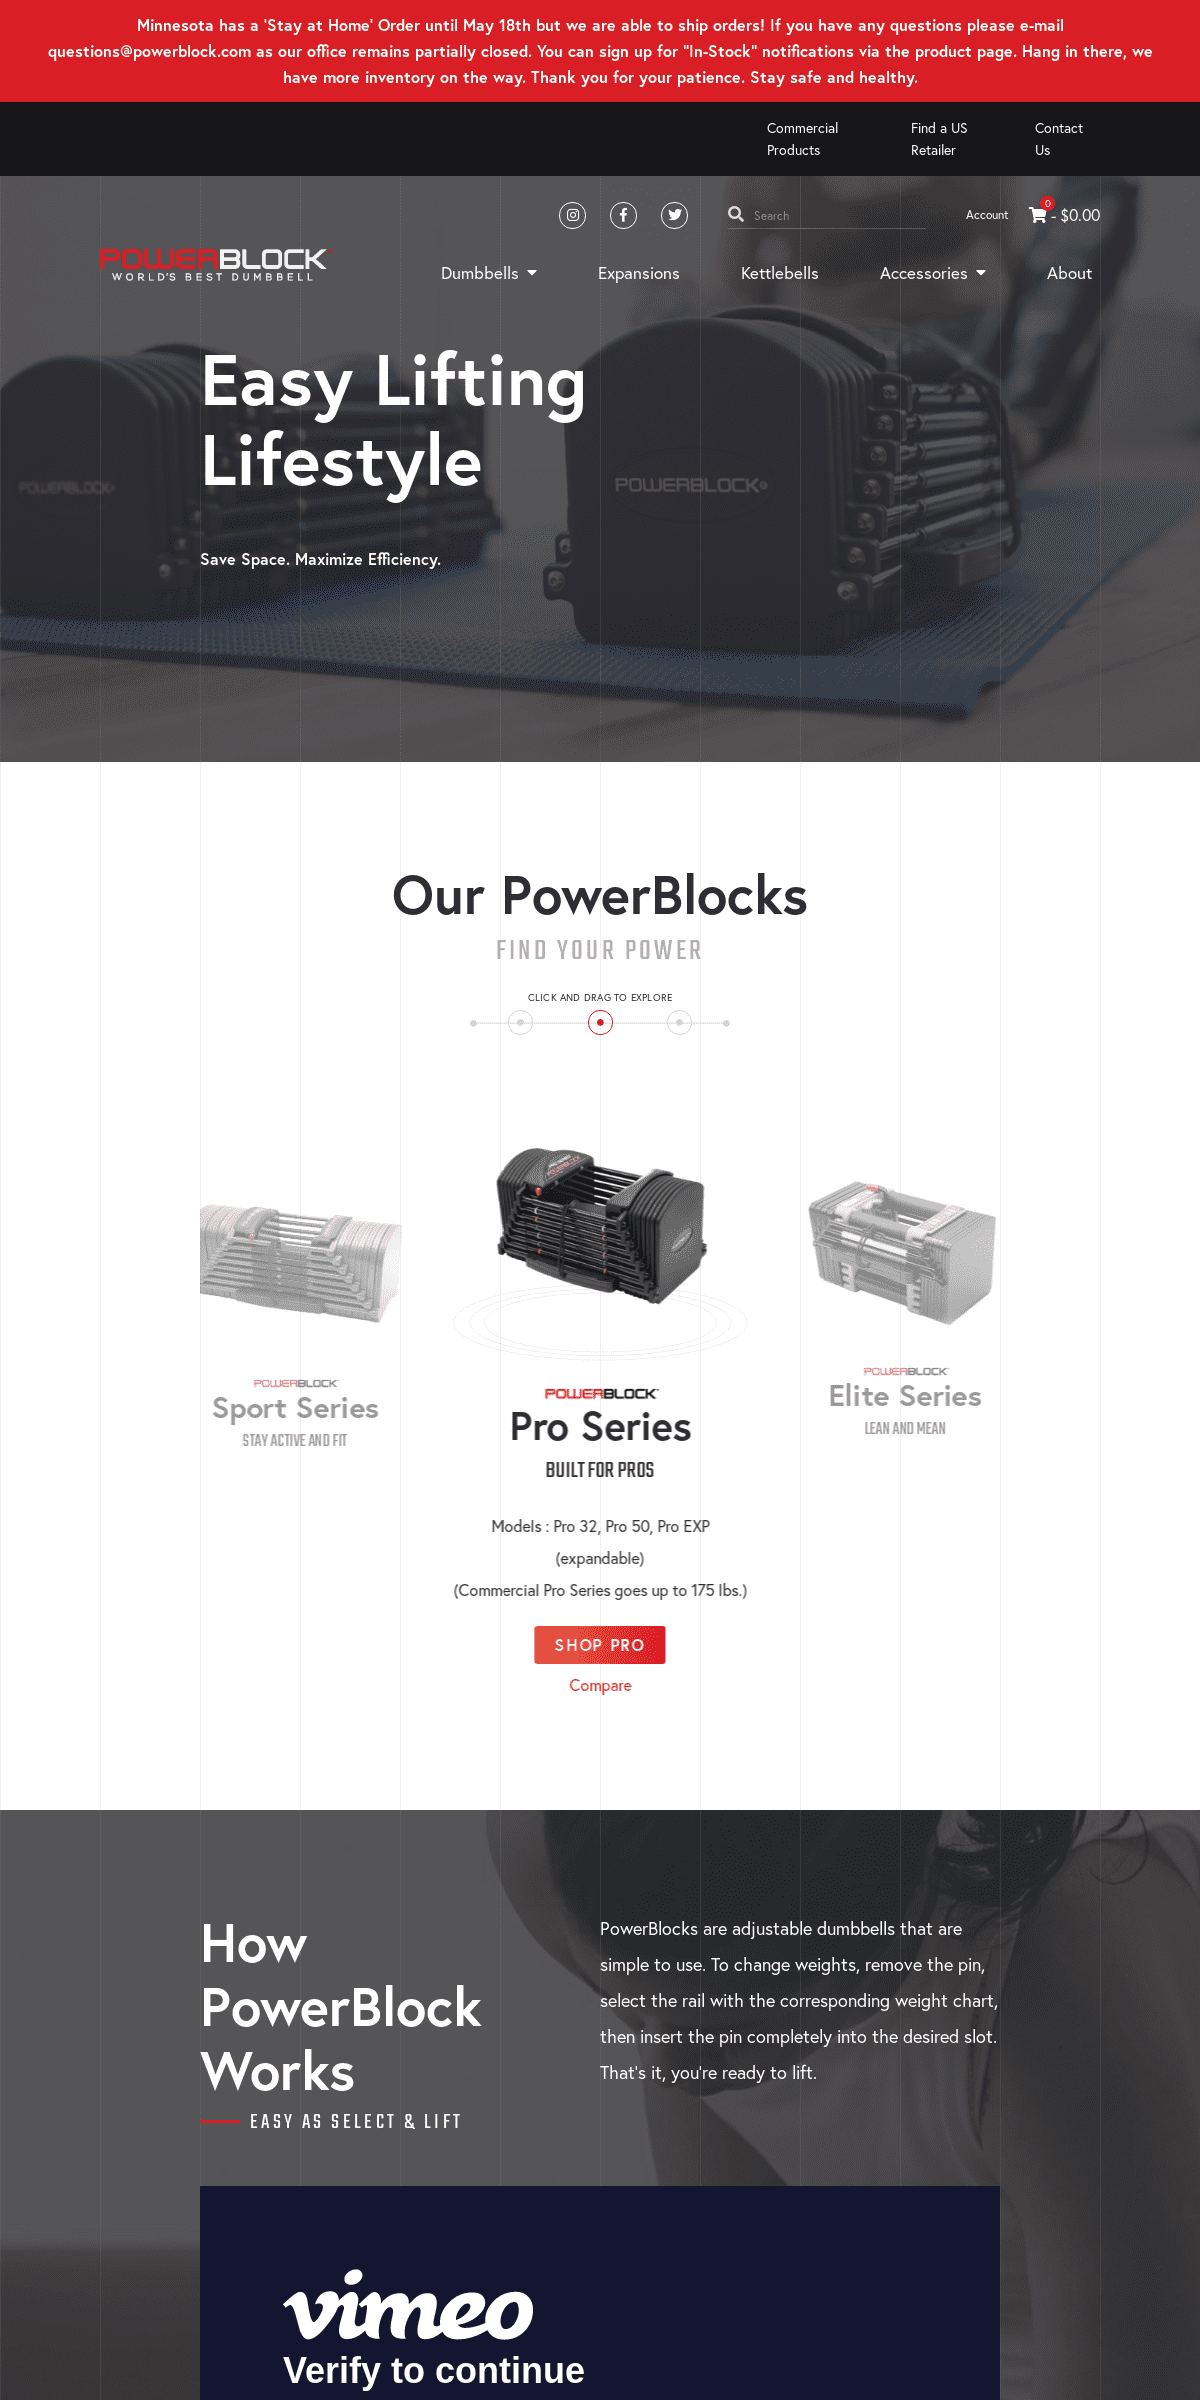 A complete backup of powerblock.com